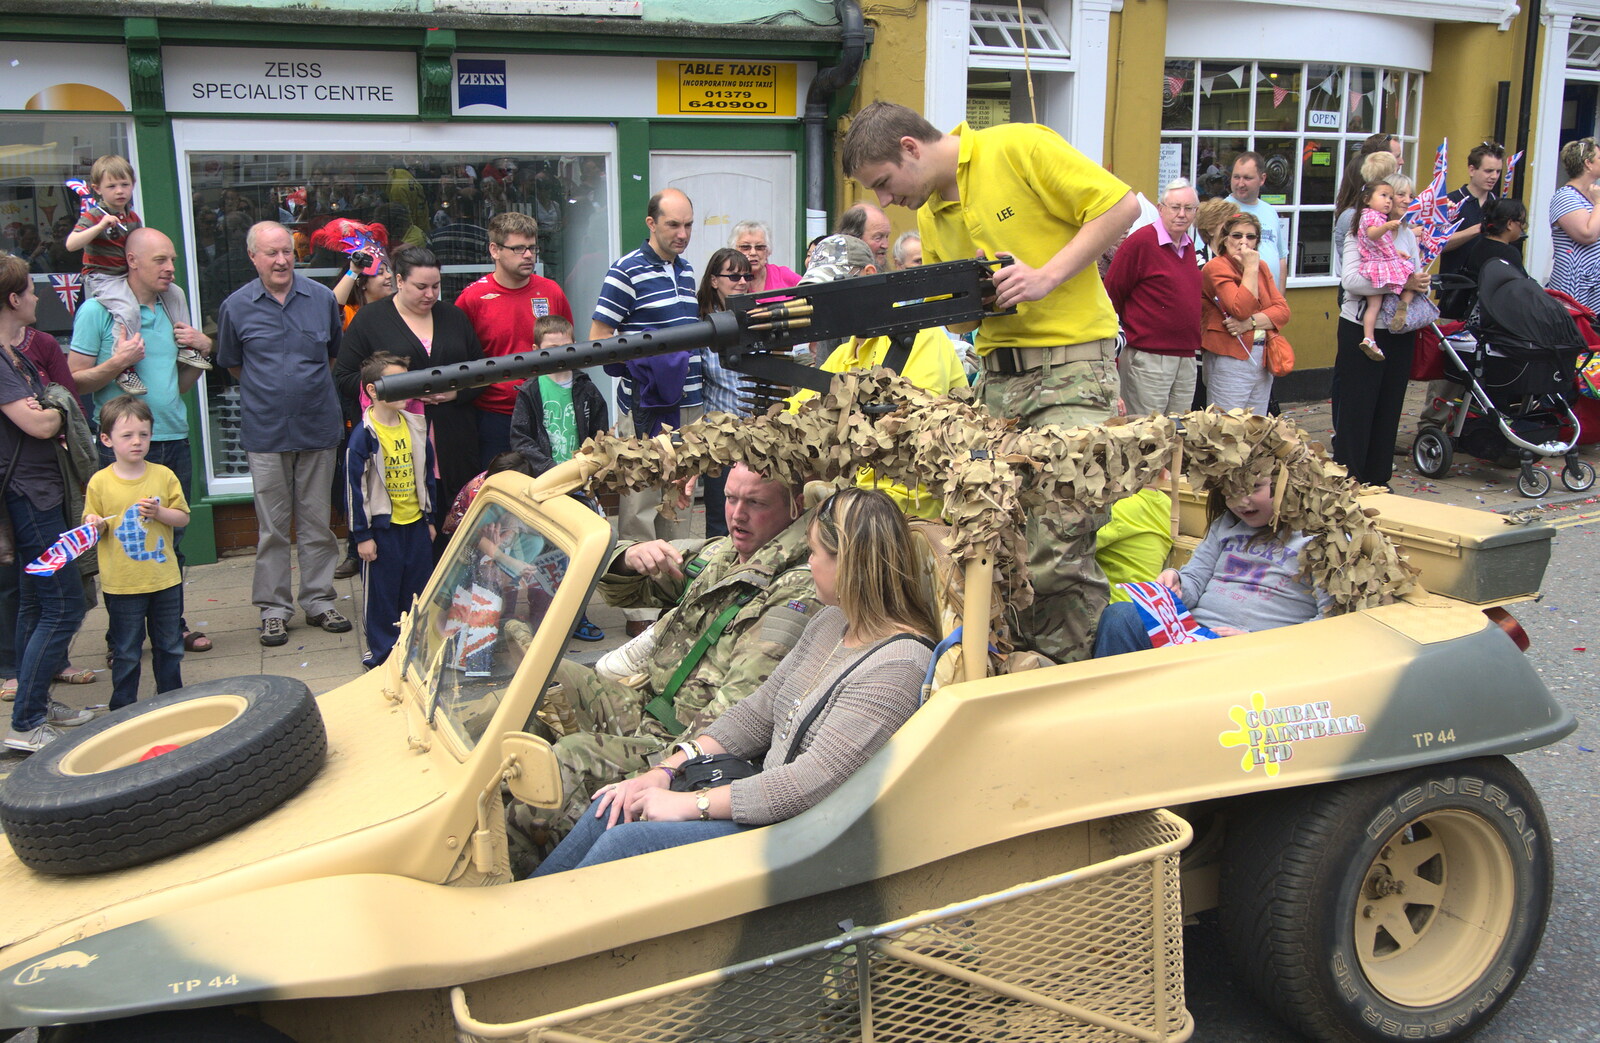 A dune buggy with a very large gun from Morris Dancing and a Carnival Procession, Diss, Norfolk - 17th June 2012